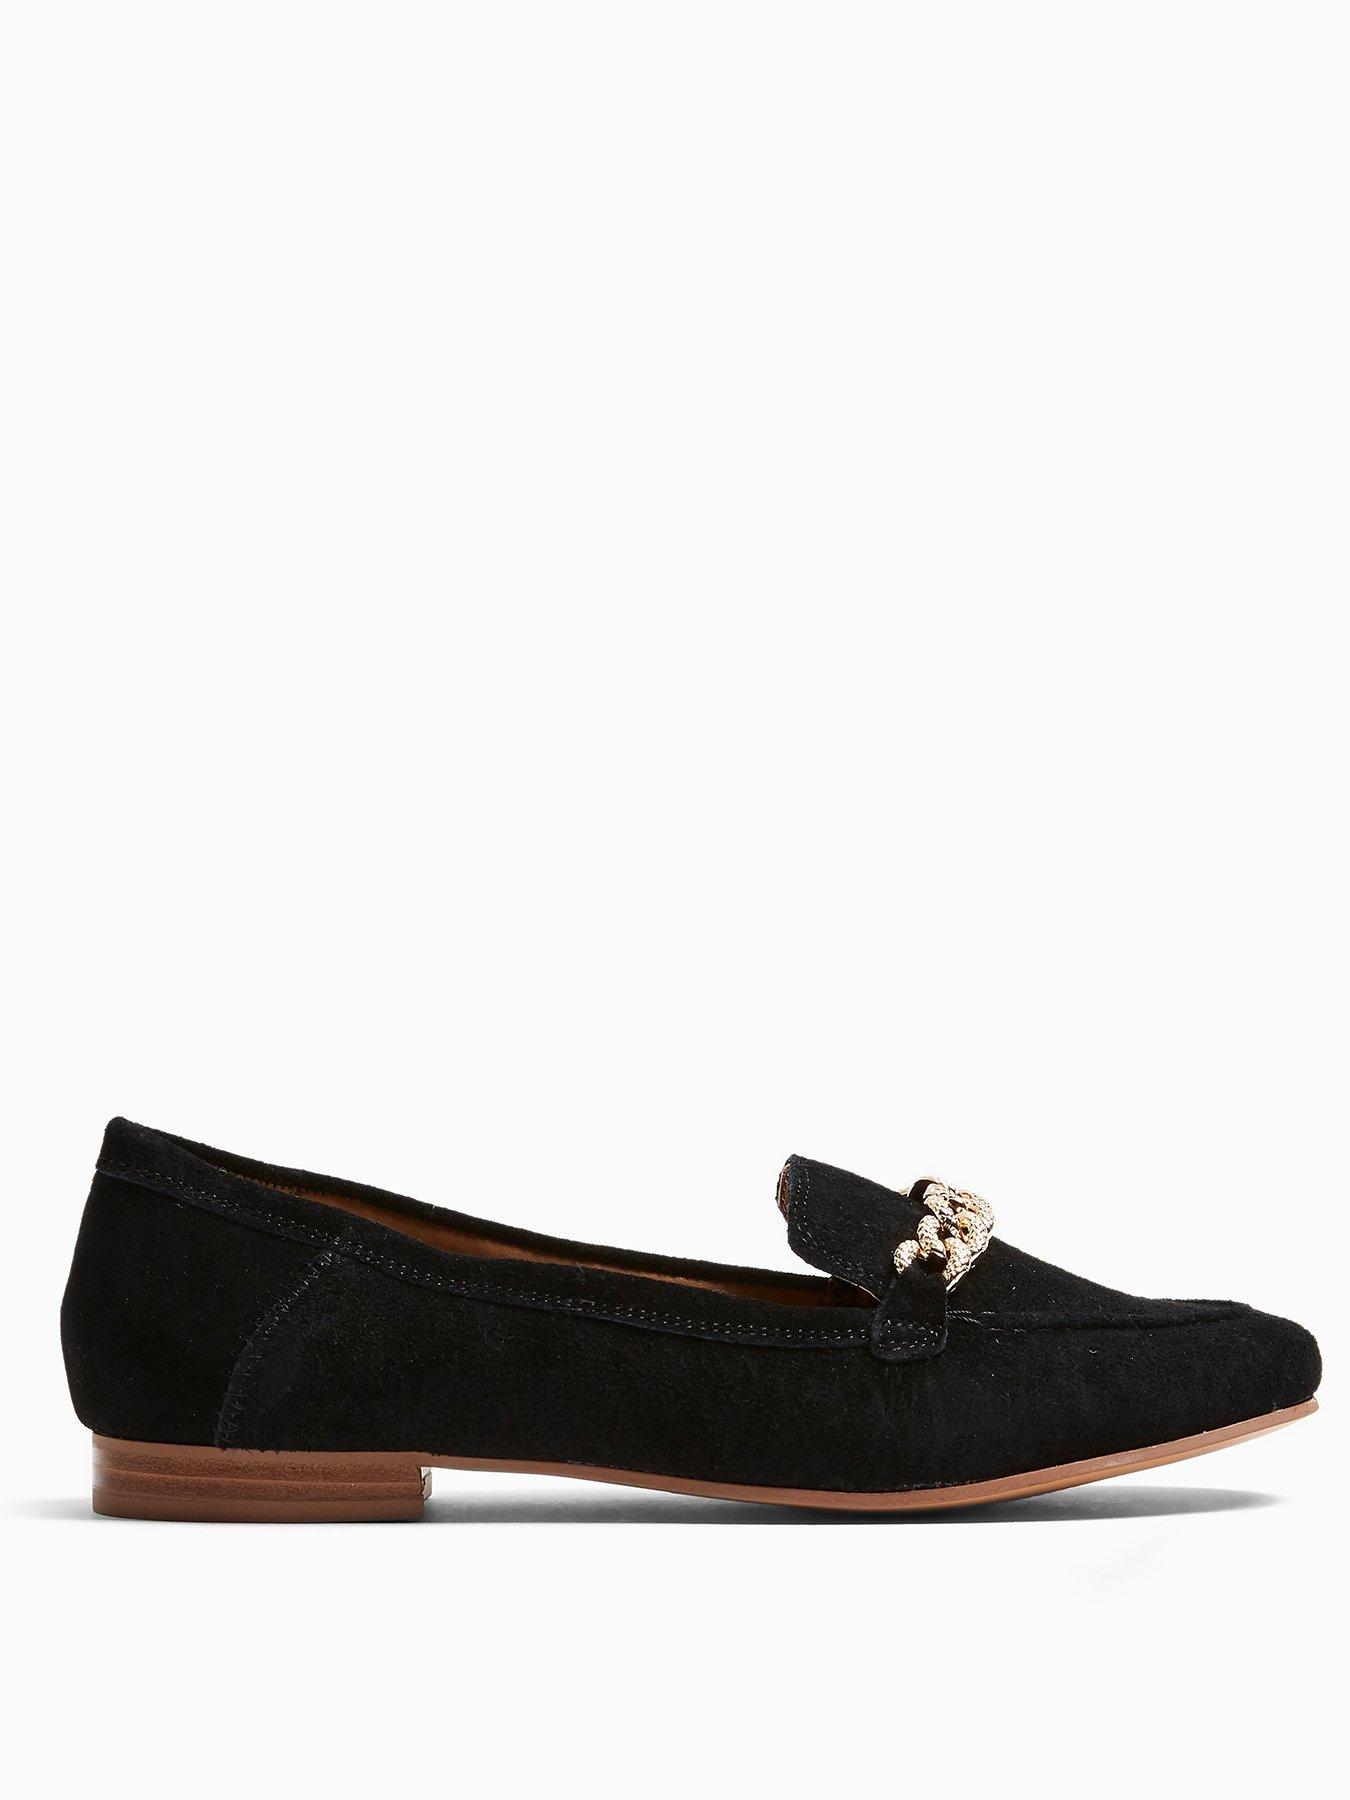 topshop loafers